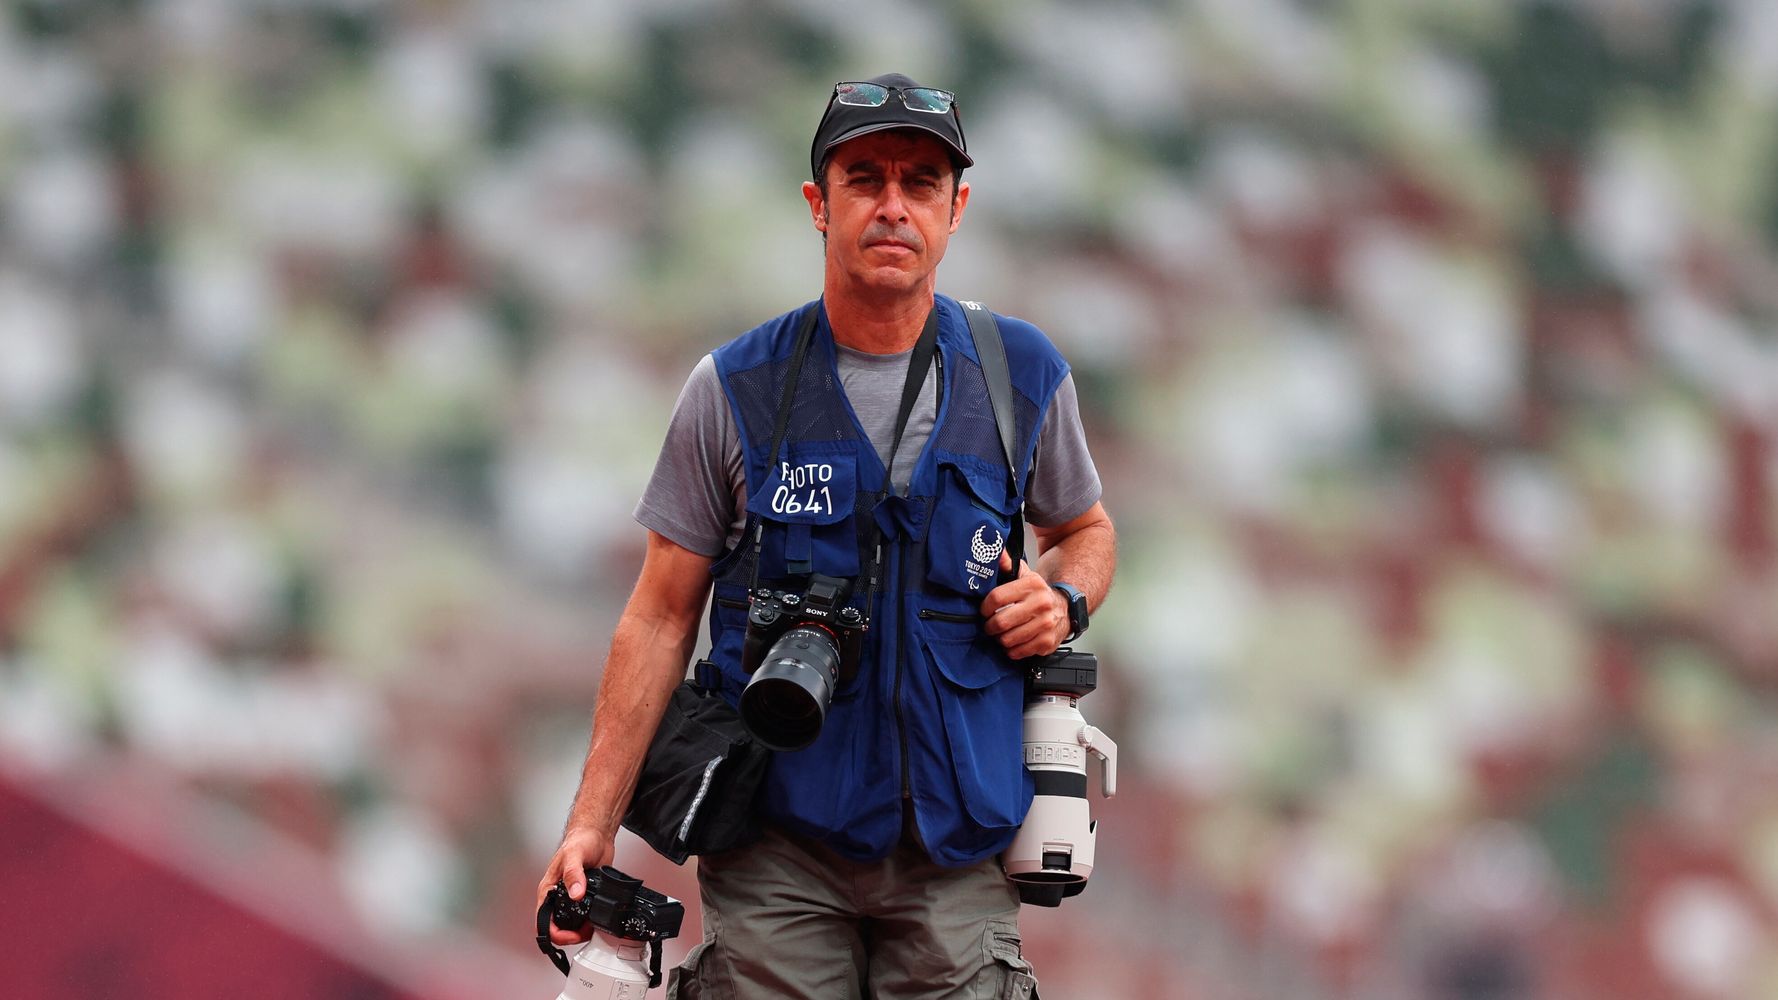 AP Photographer, His Leg Lost, Seeks Answers From Paralympians